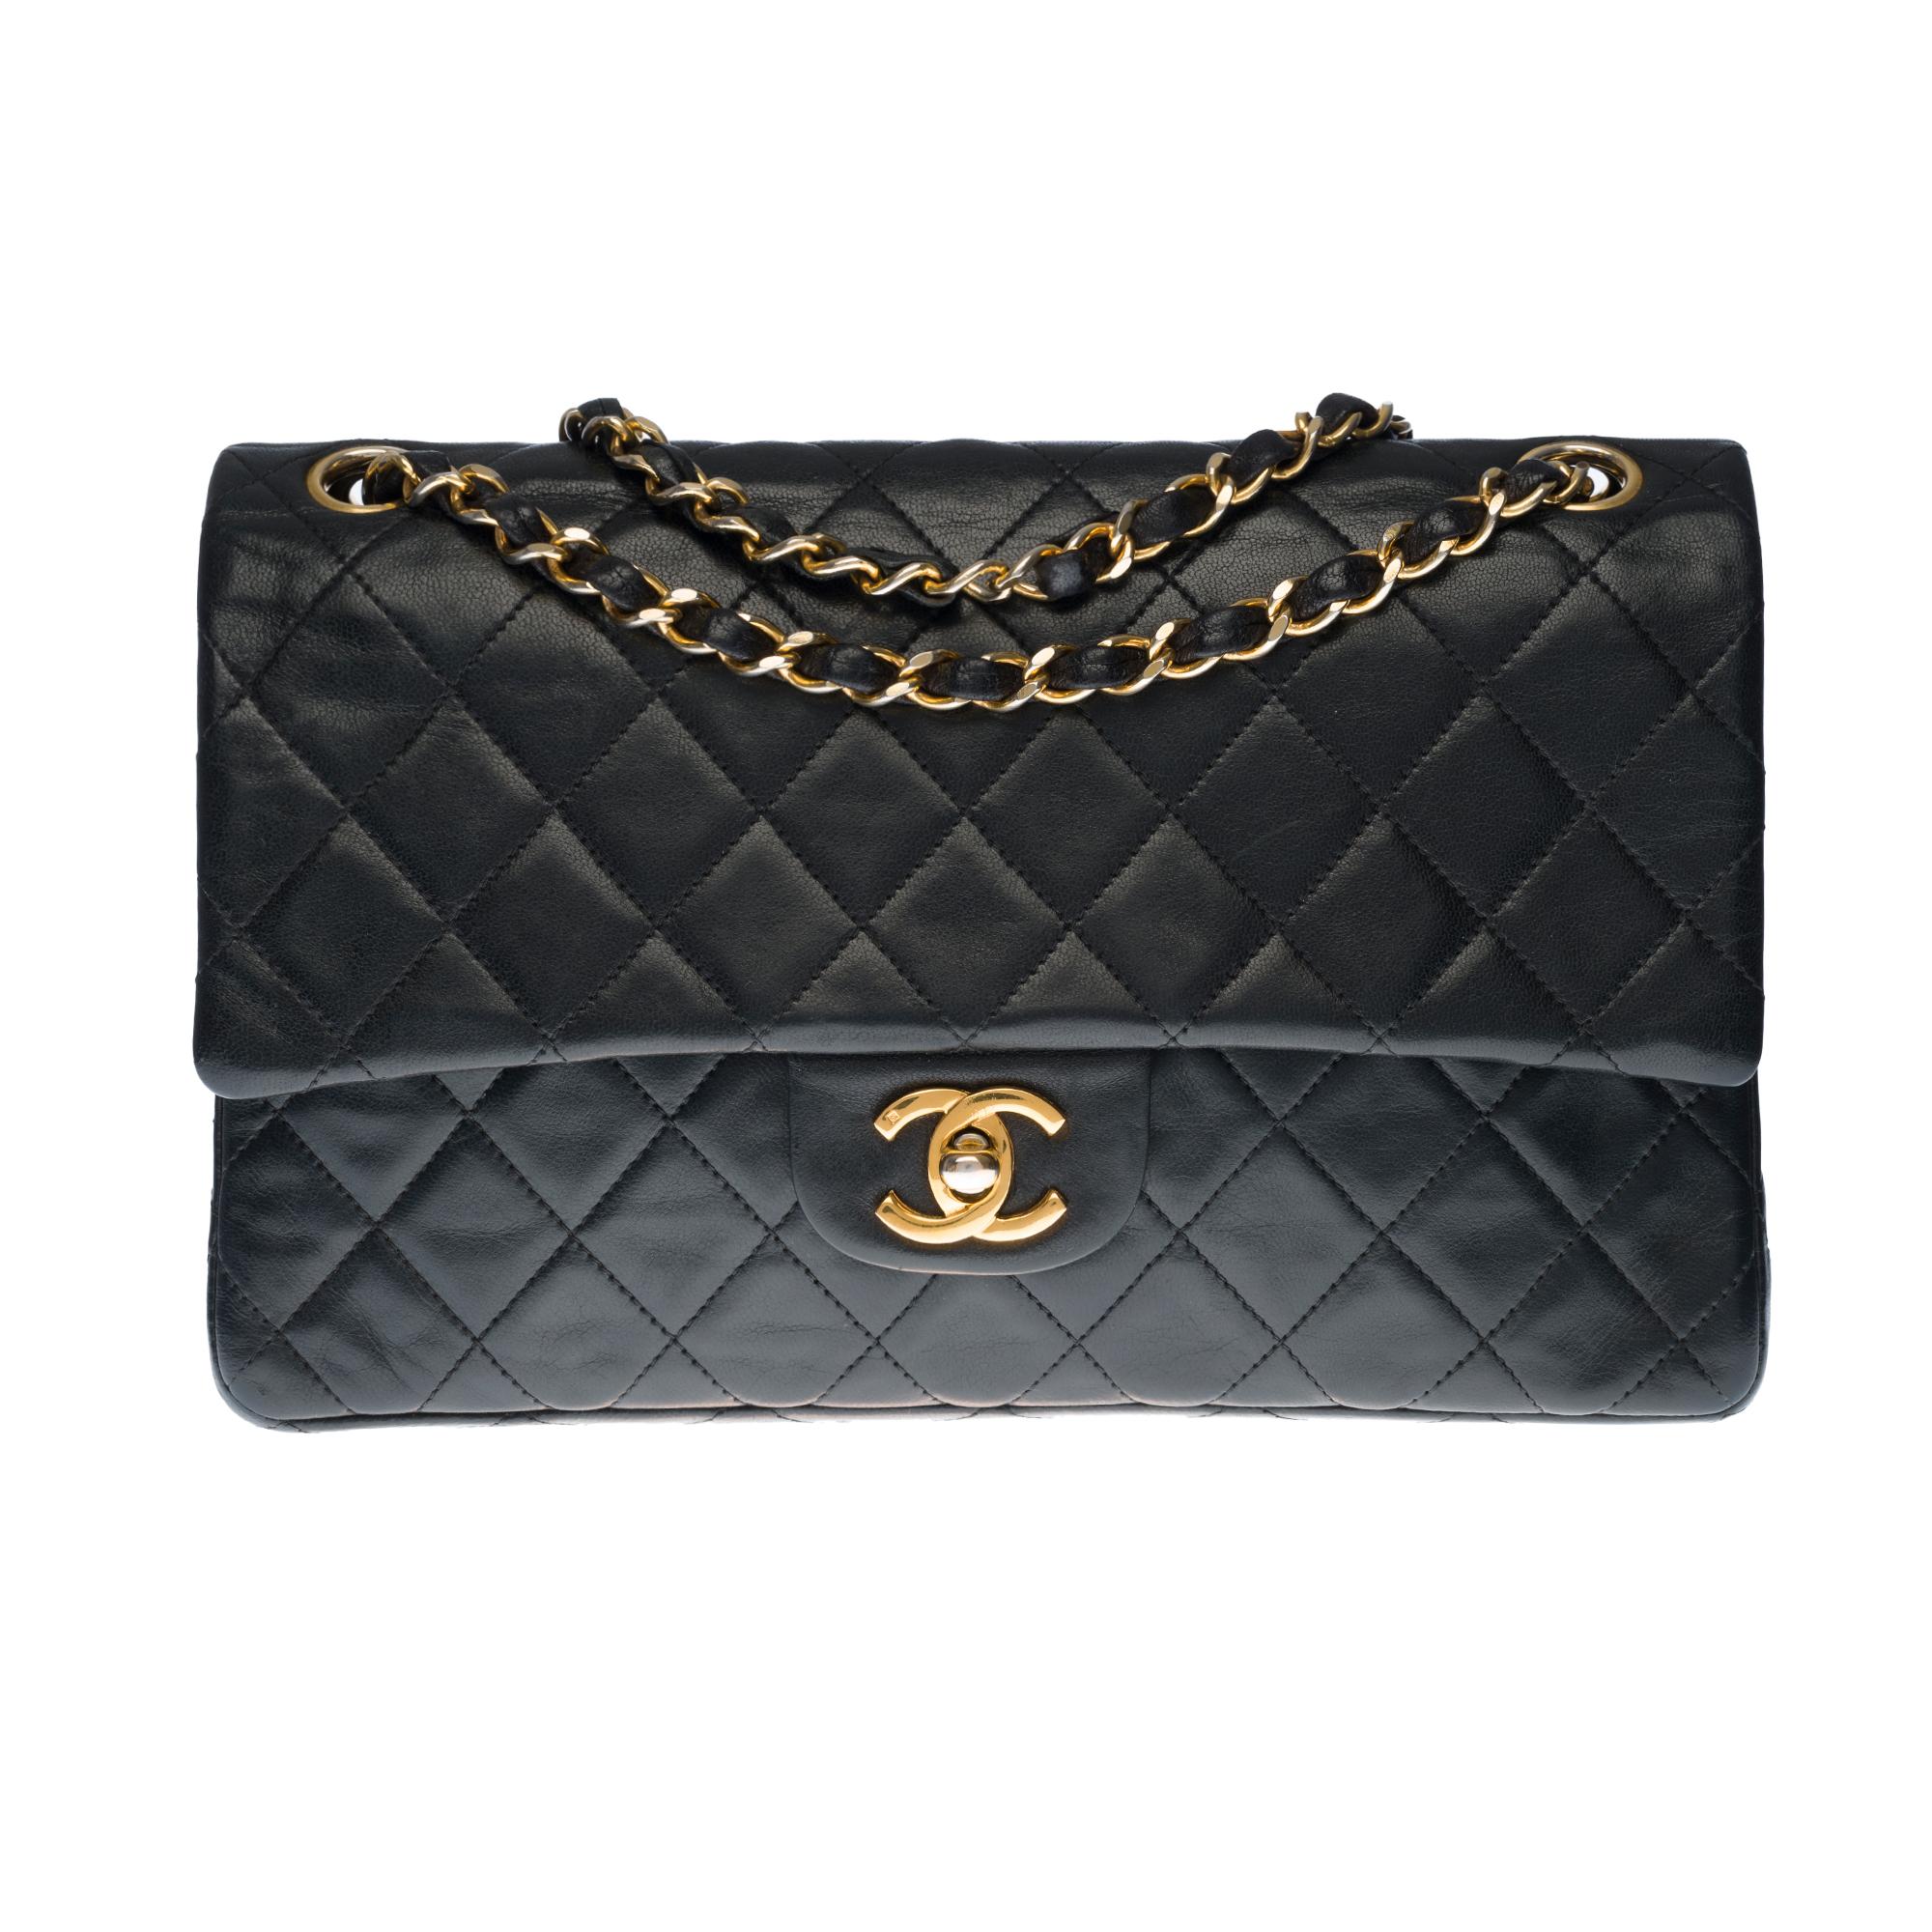 Beautiful Chanel Timeless Medium 25cm handbag with double flap in black quilted lambskin leather, gold-tone metal hardware, a gold-tone metal chain handle interwoven with black leather allowing a hand or shoulder support.

Closure with gold metal